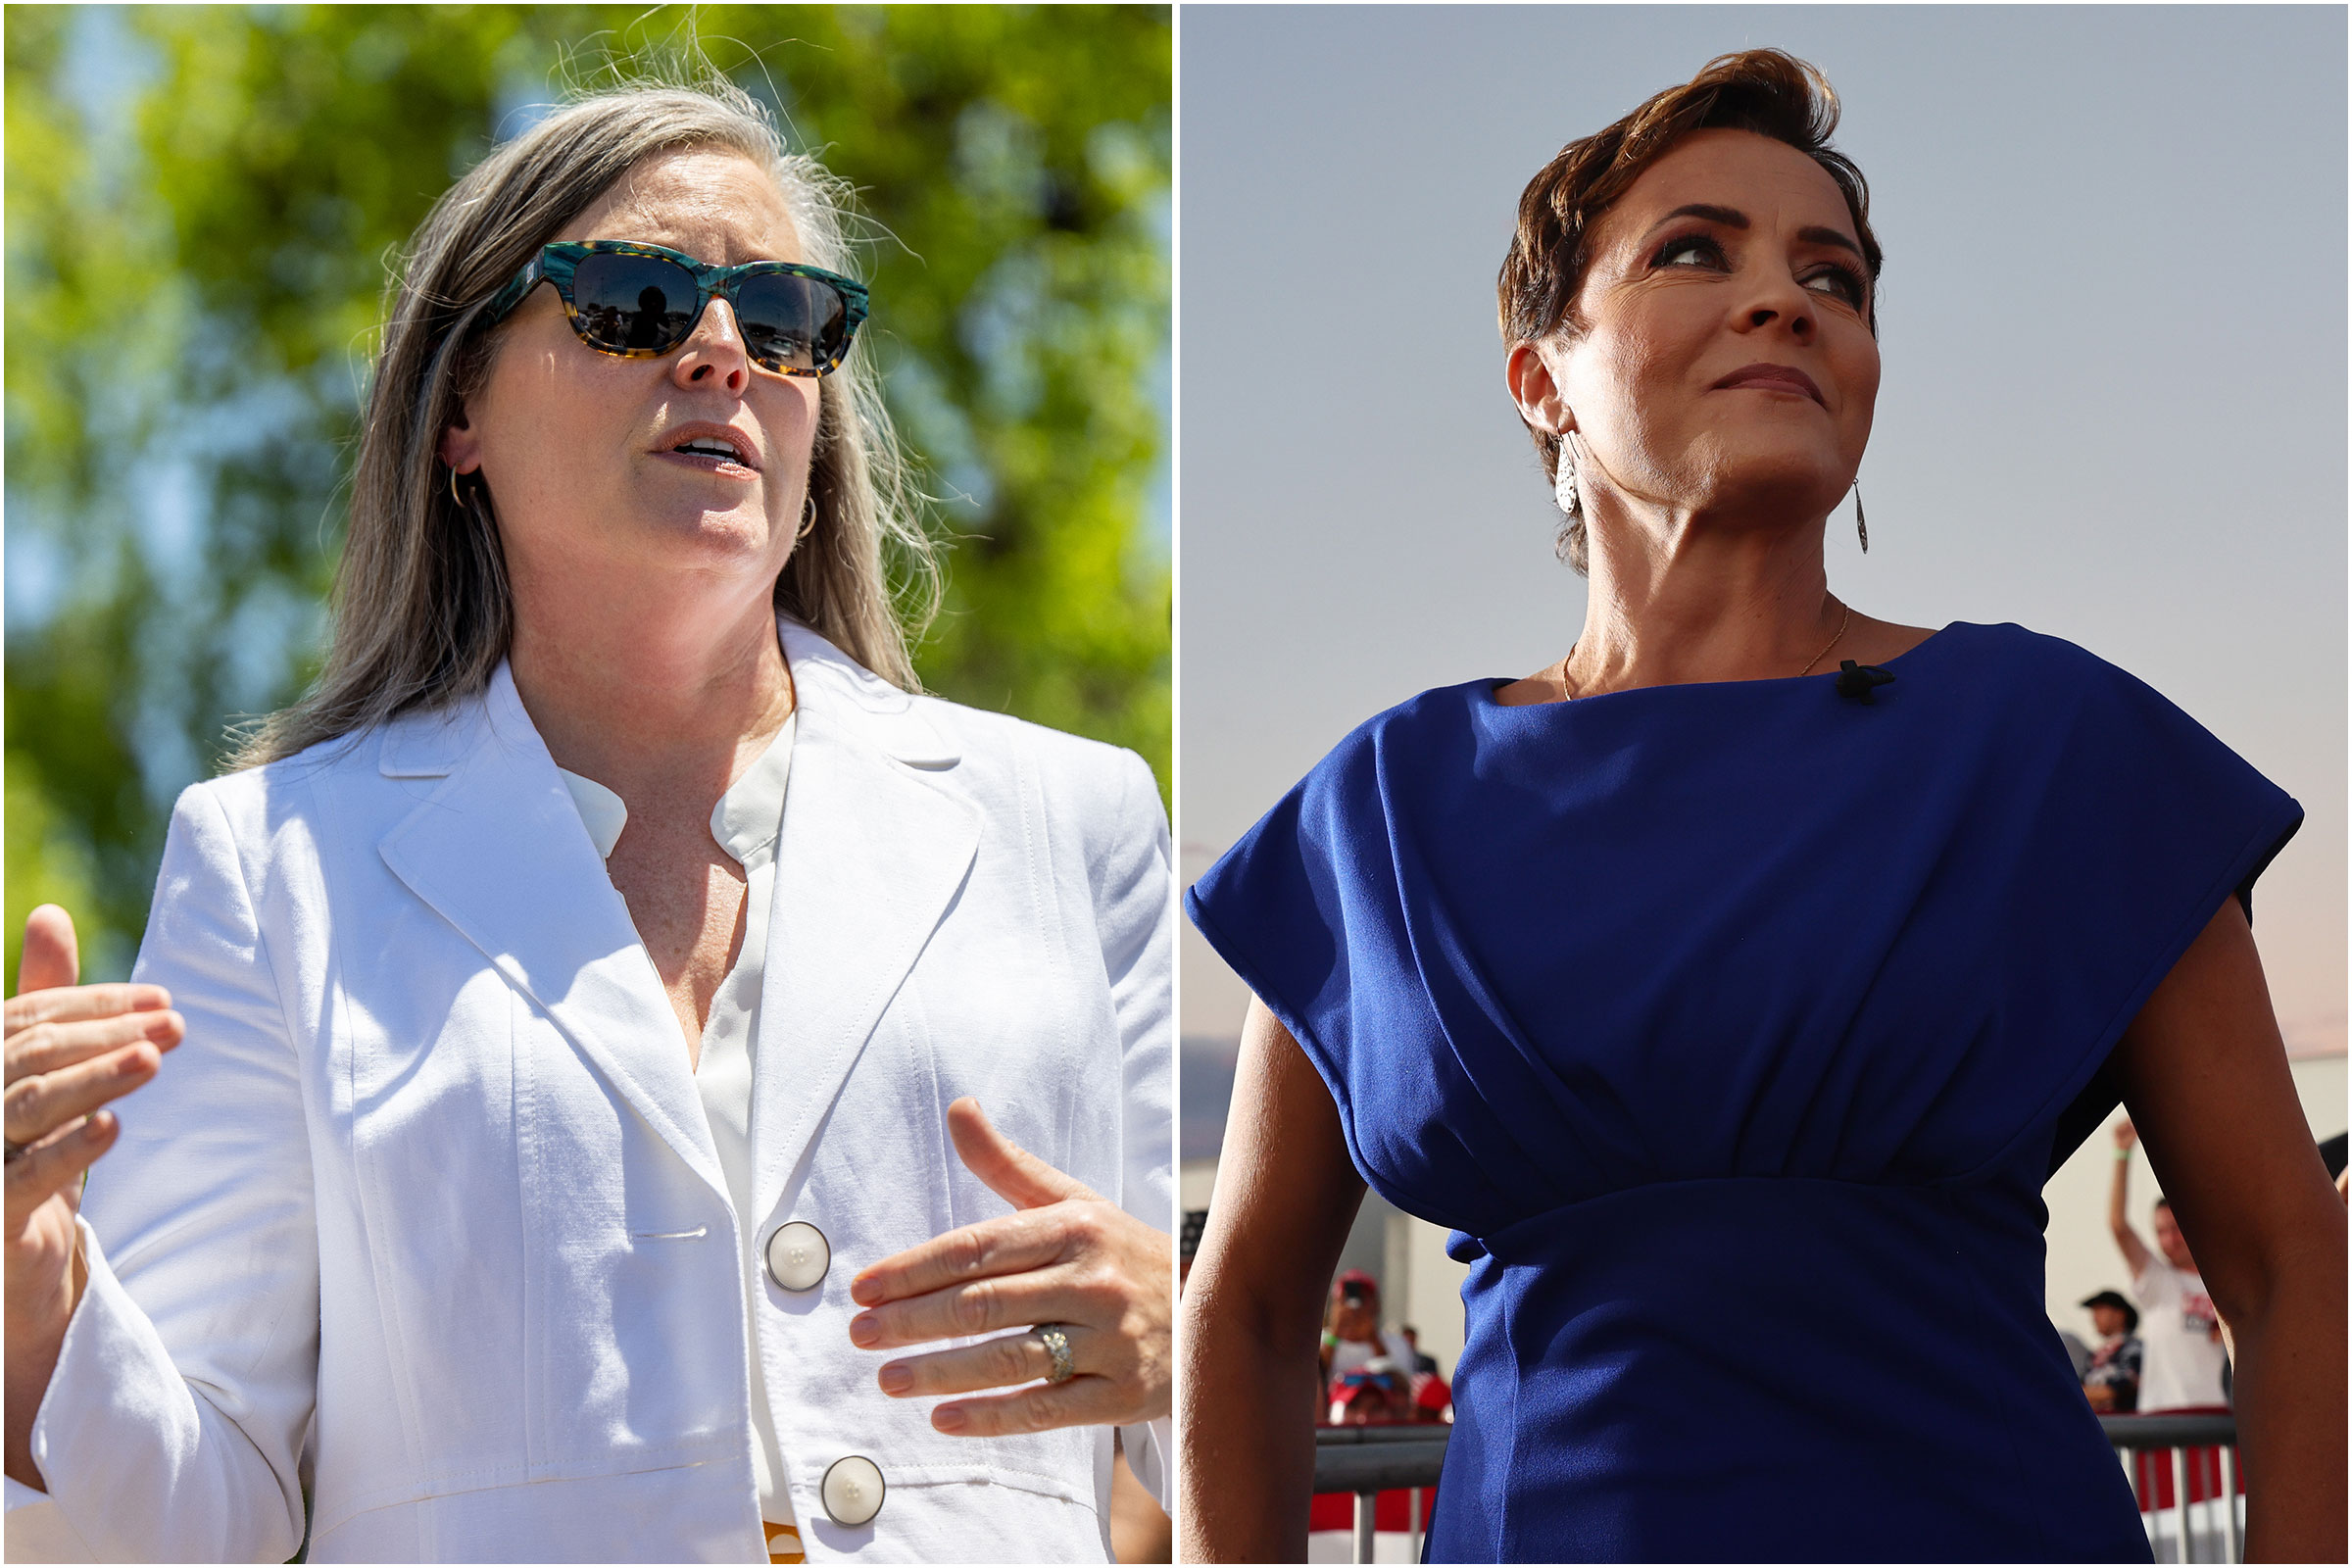 Arizona Secretary of State Katie Hobbs, a Democrat, left, and Republican Kari Lake are vying to be Arizona's next governor. (Brandon Bell—Getty Images; Mario Tama—Getty Images)